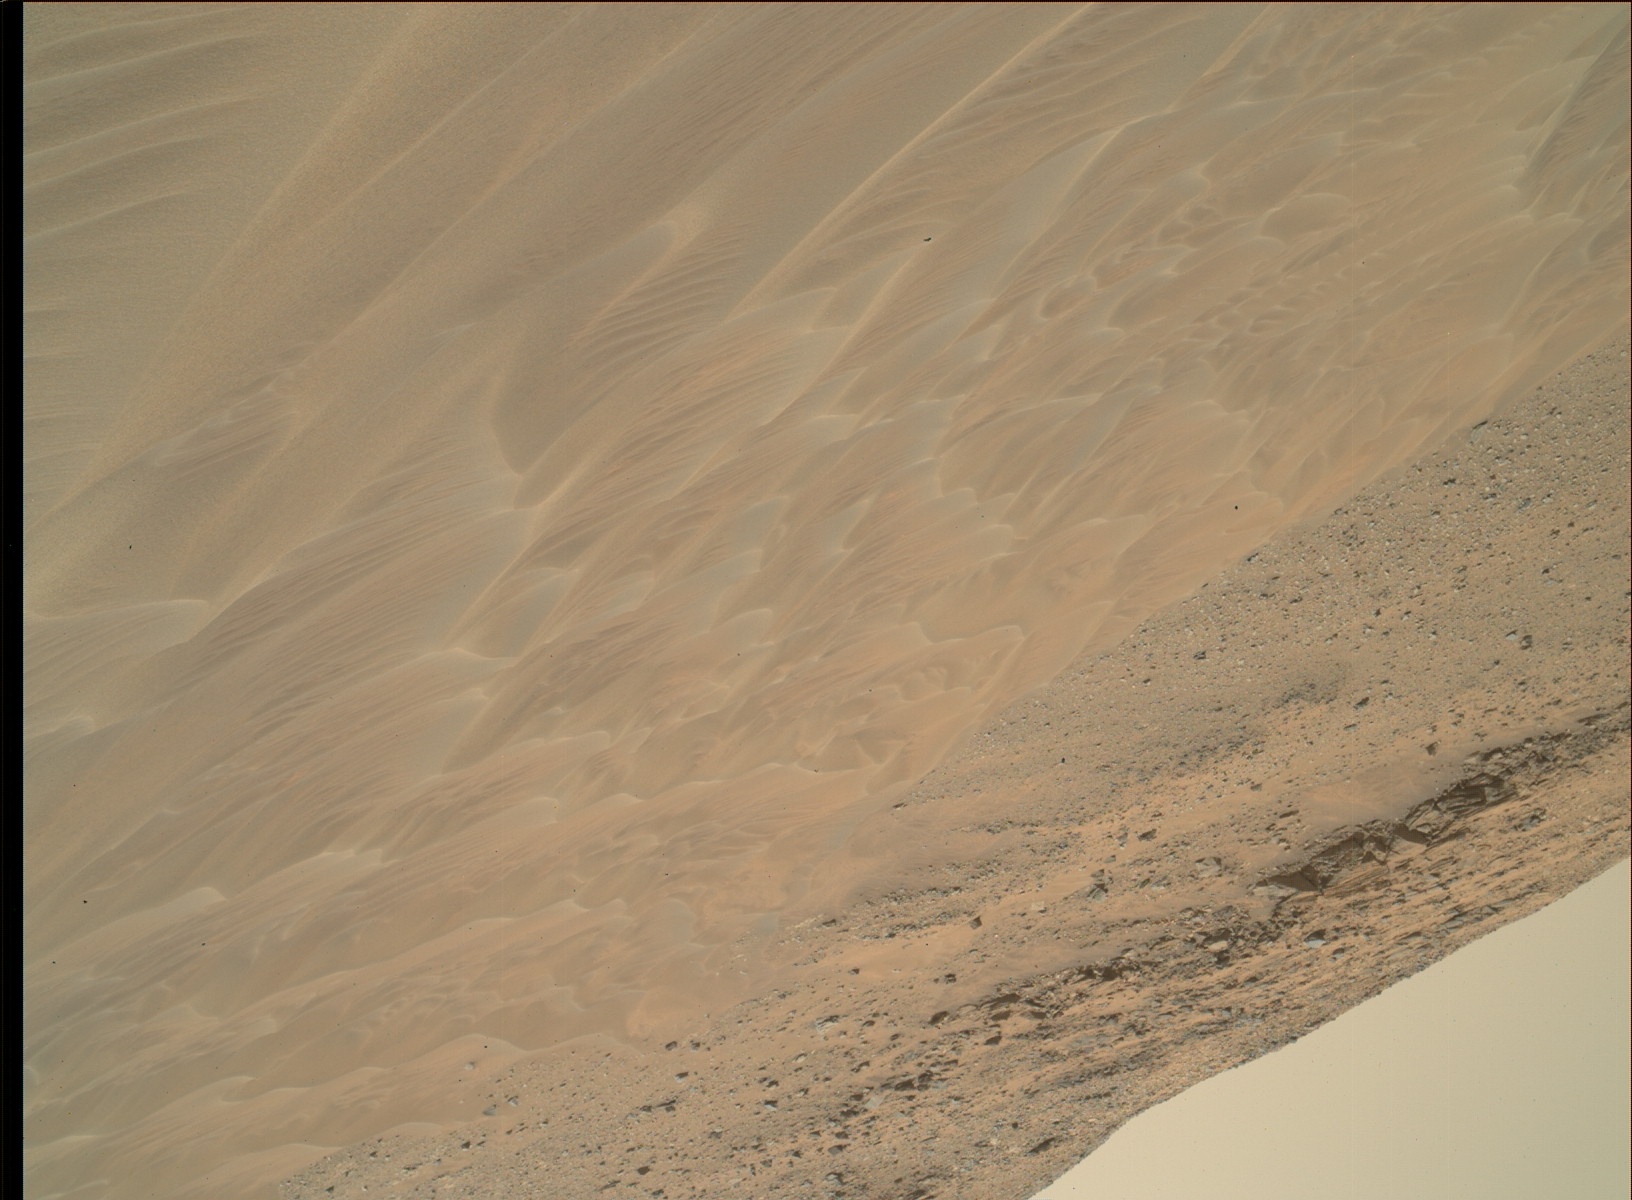 Nasa's Mars rover Curiosity acquired this image using its Mars Hand Lens Imager (MAHLI) on Sol 957